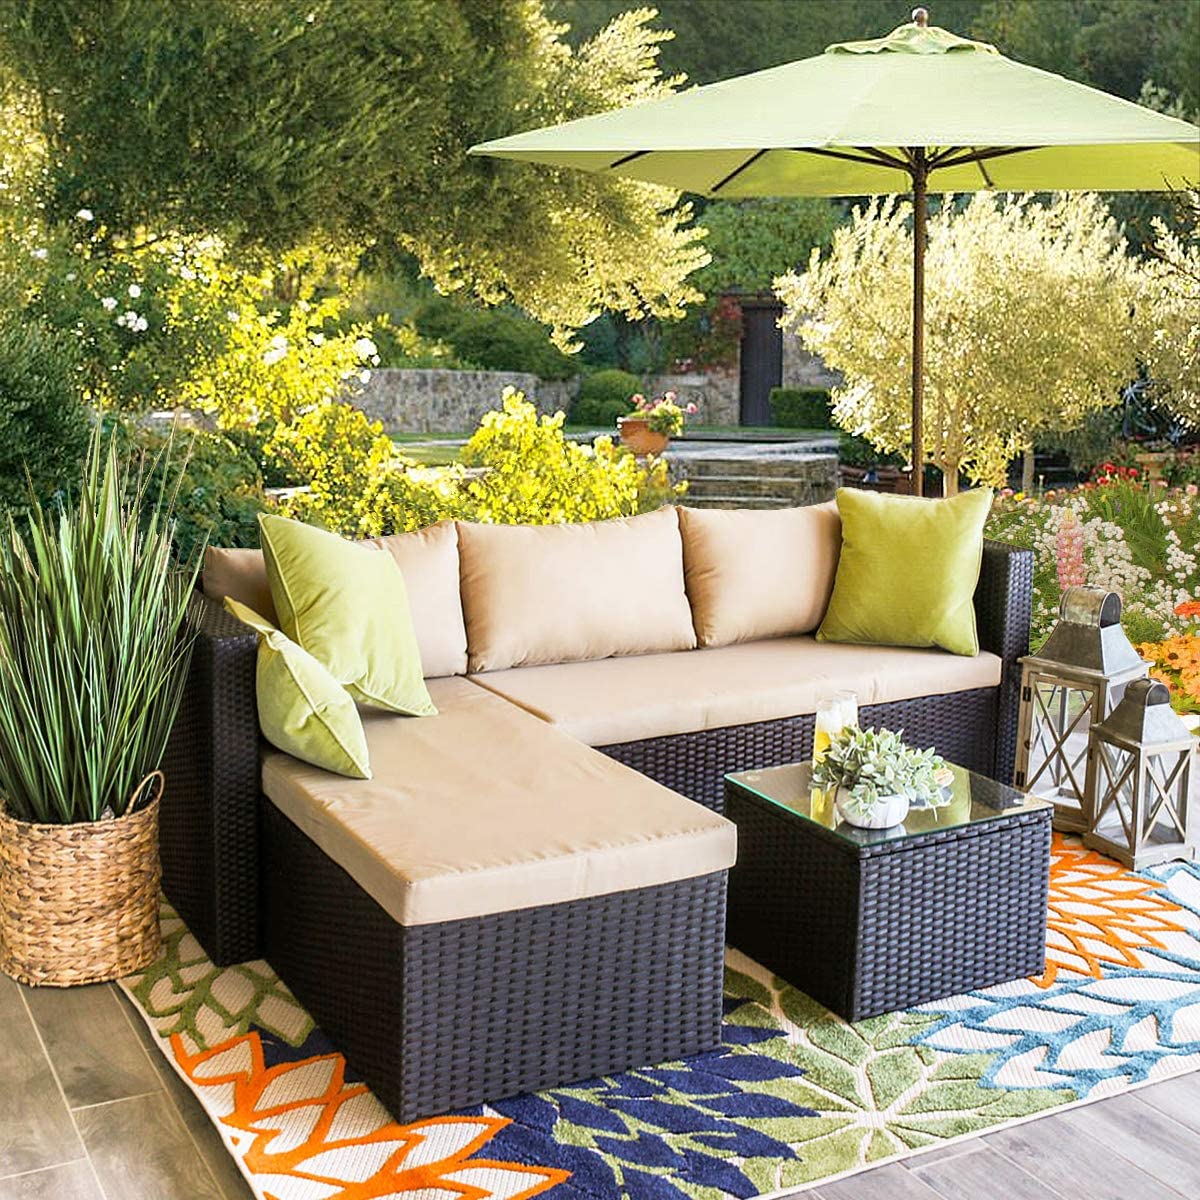 Best Outdoor Sectional Sofa Review | 2021 | Great Price | Free Shipping